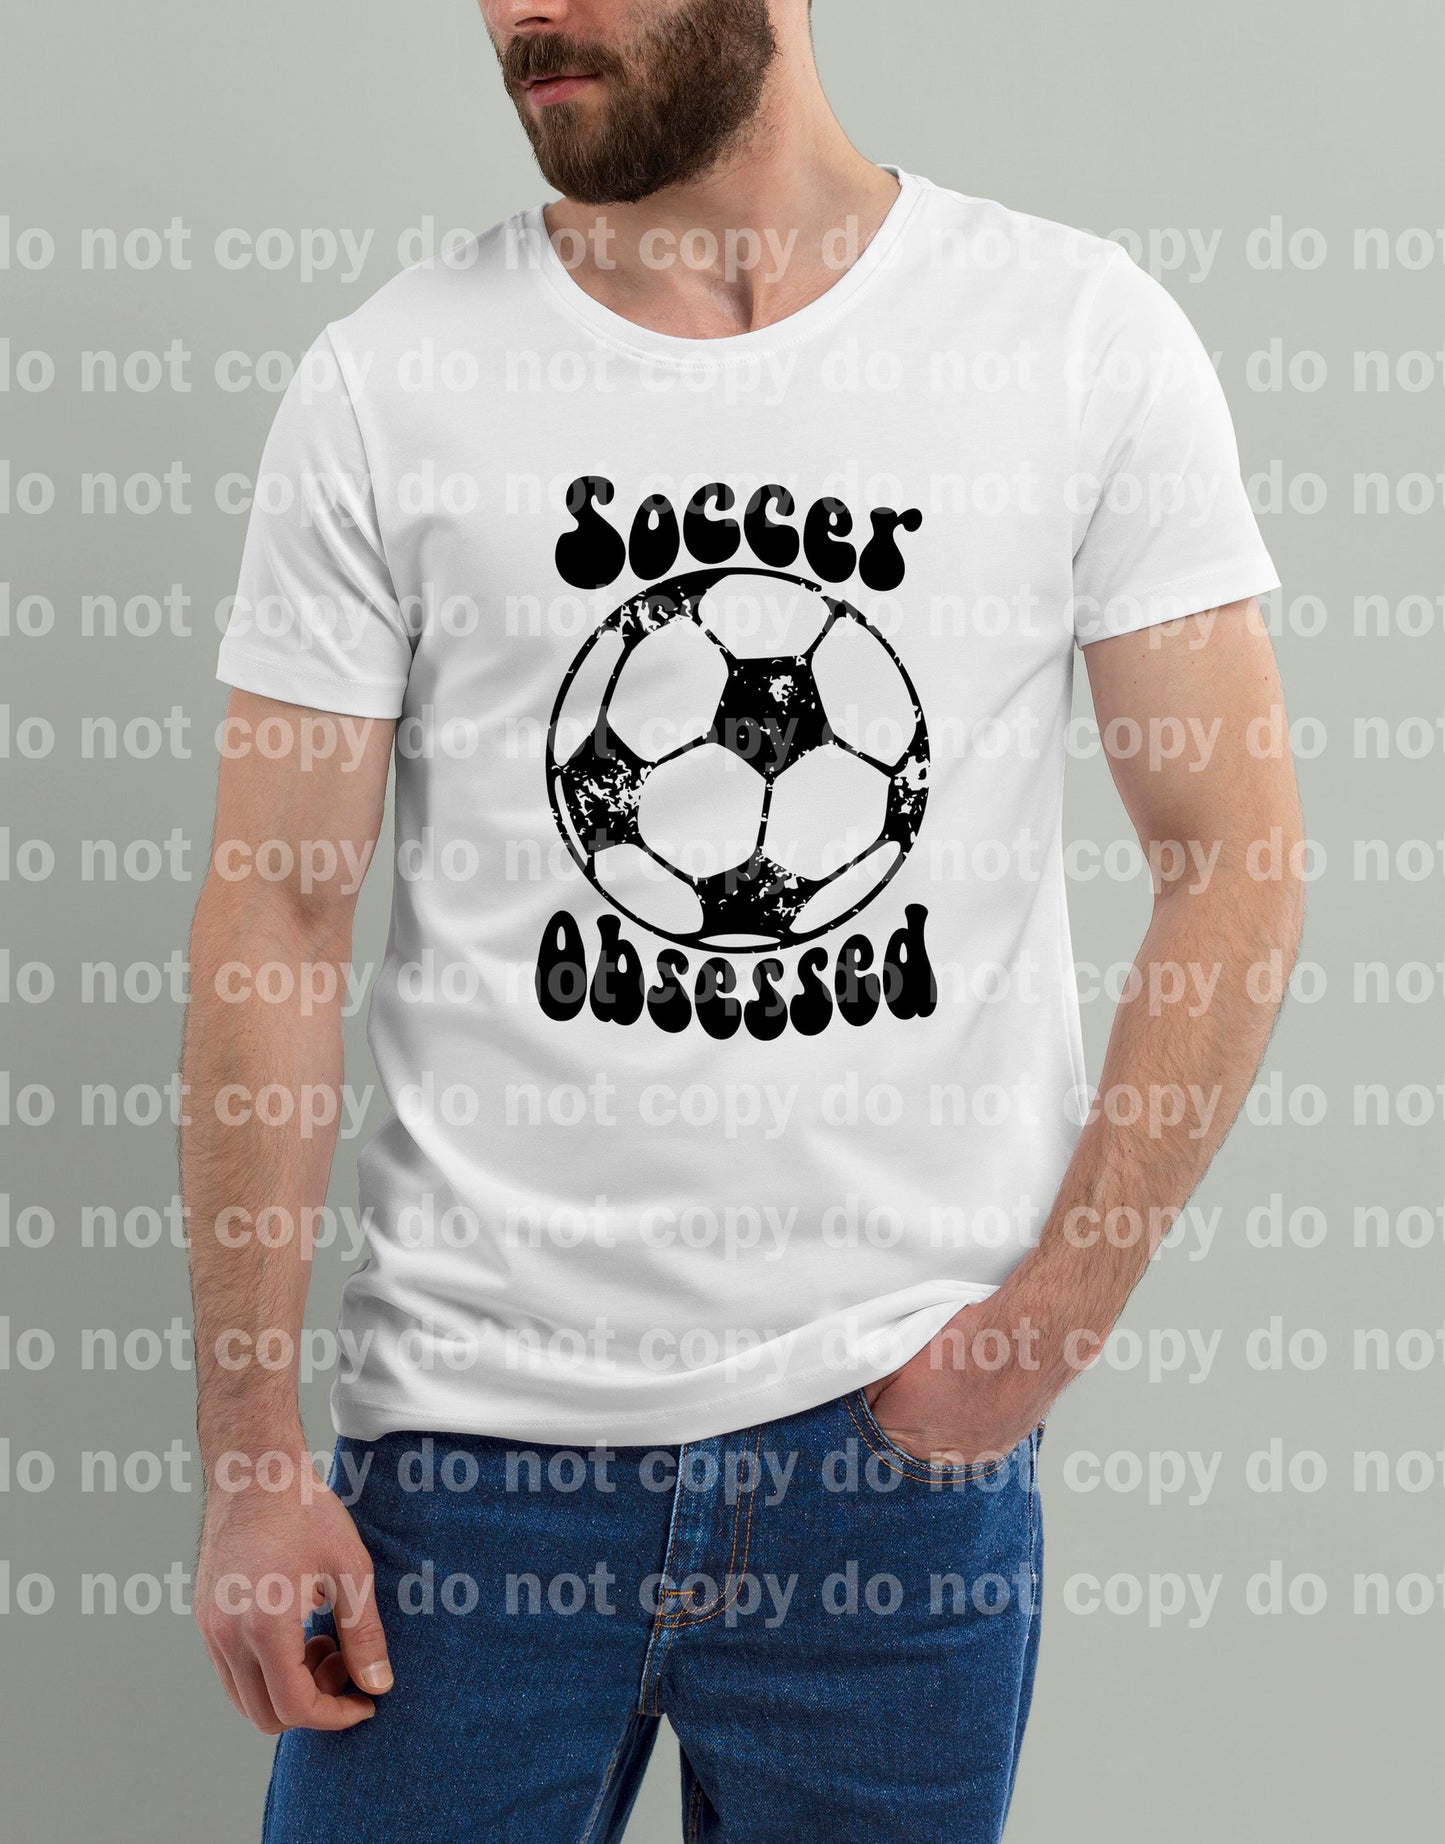 Soccer Obsessed Dream Print or Sublimation Print